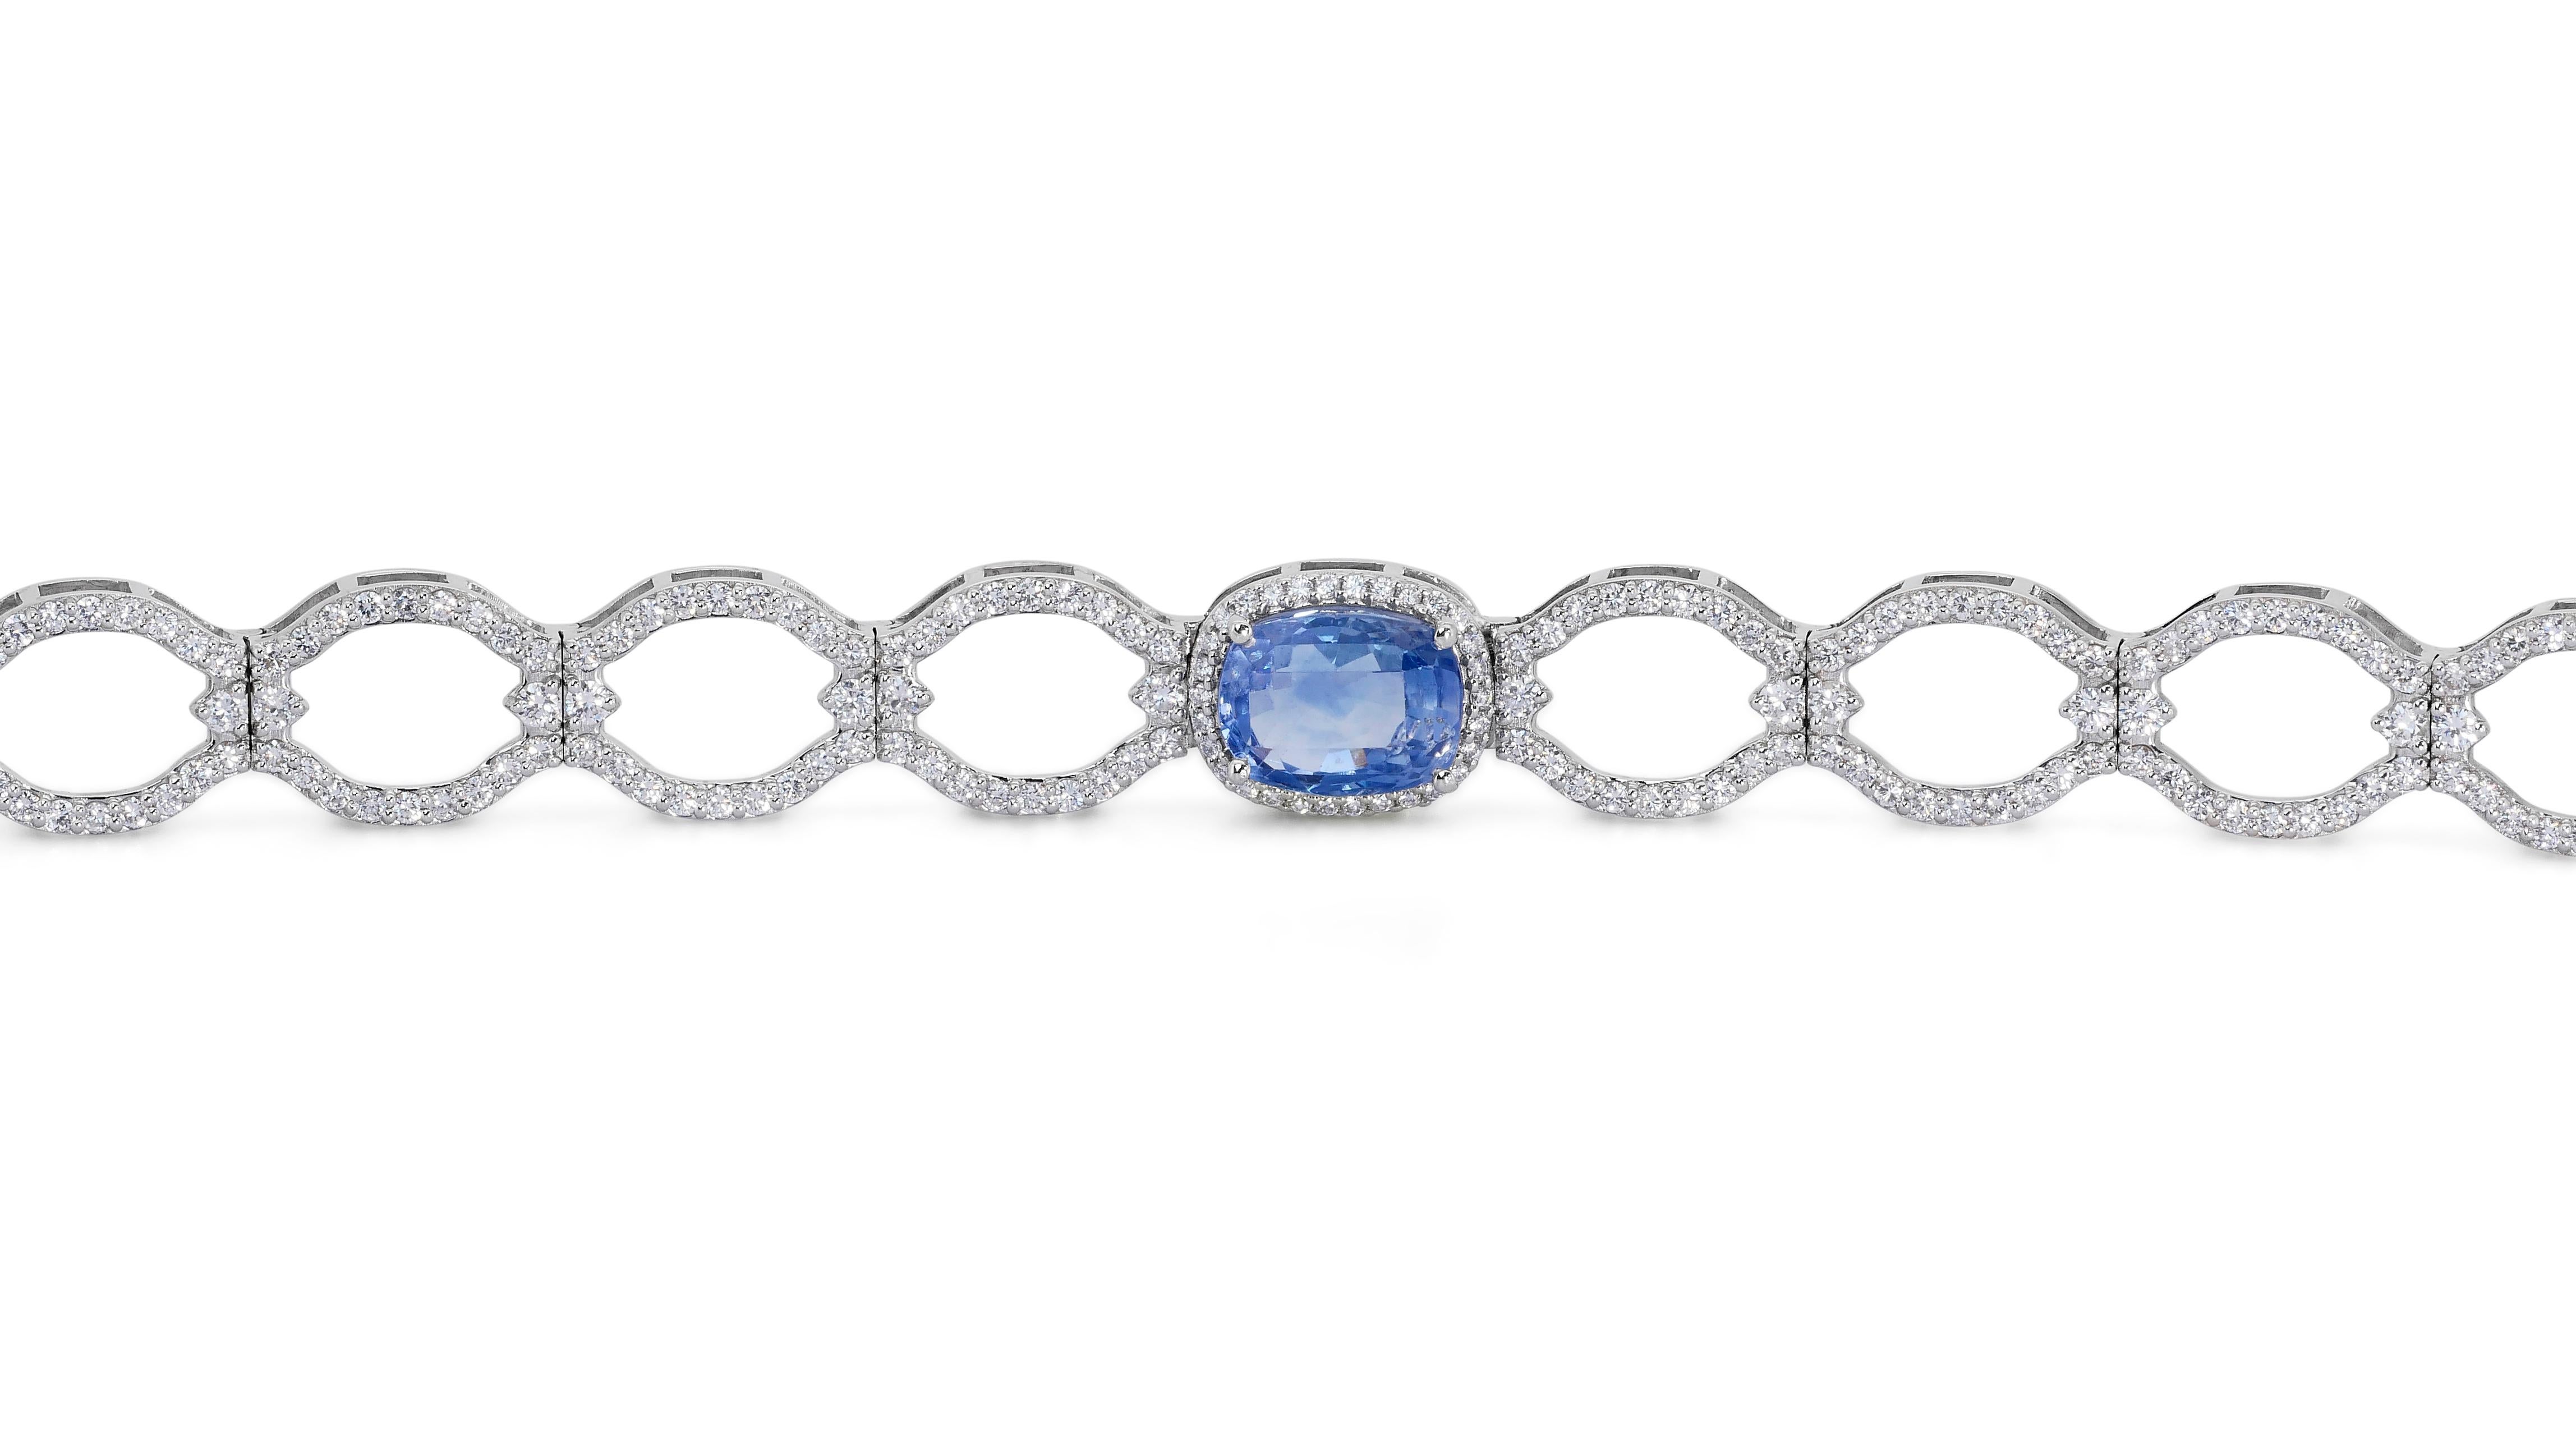 14k White Gold Bracelet w/ 9.72ct Natural Sapphire and Natural Diamonds GIA Cert In New Condition For Sale In רמת גן, IL